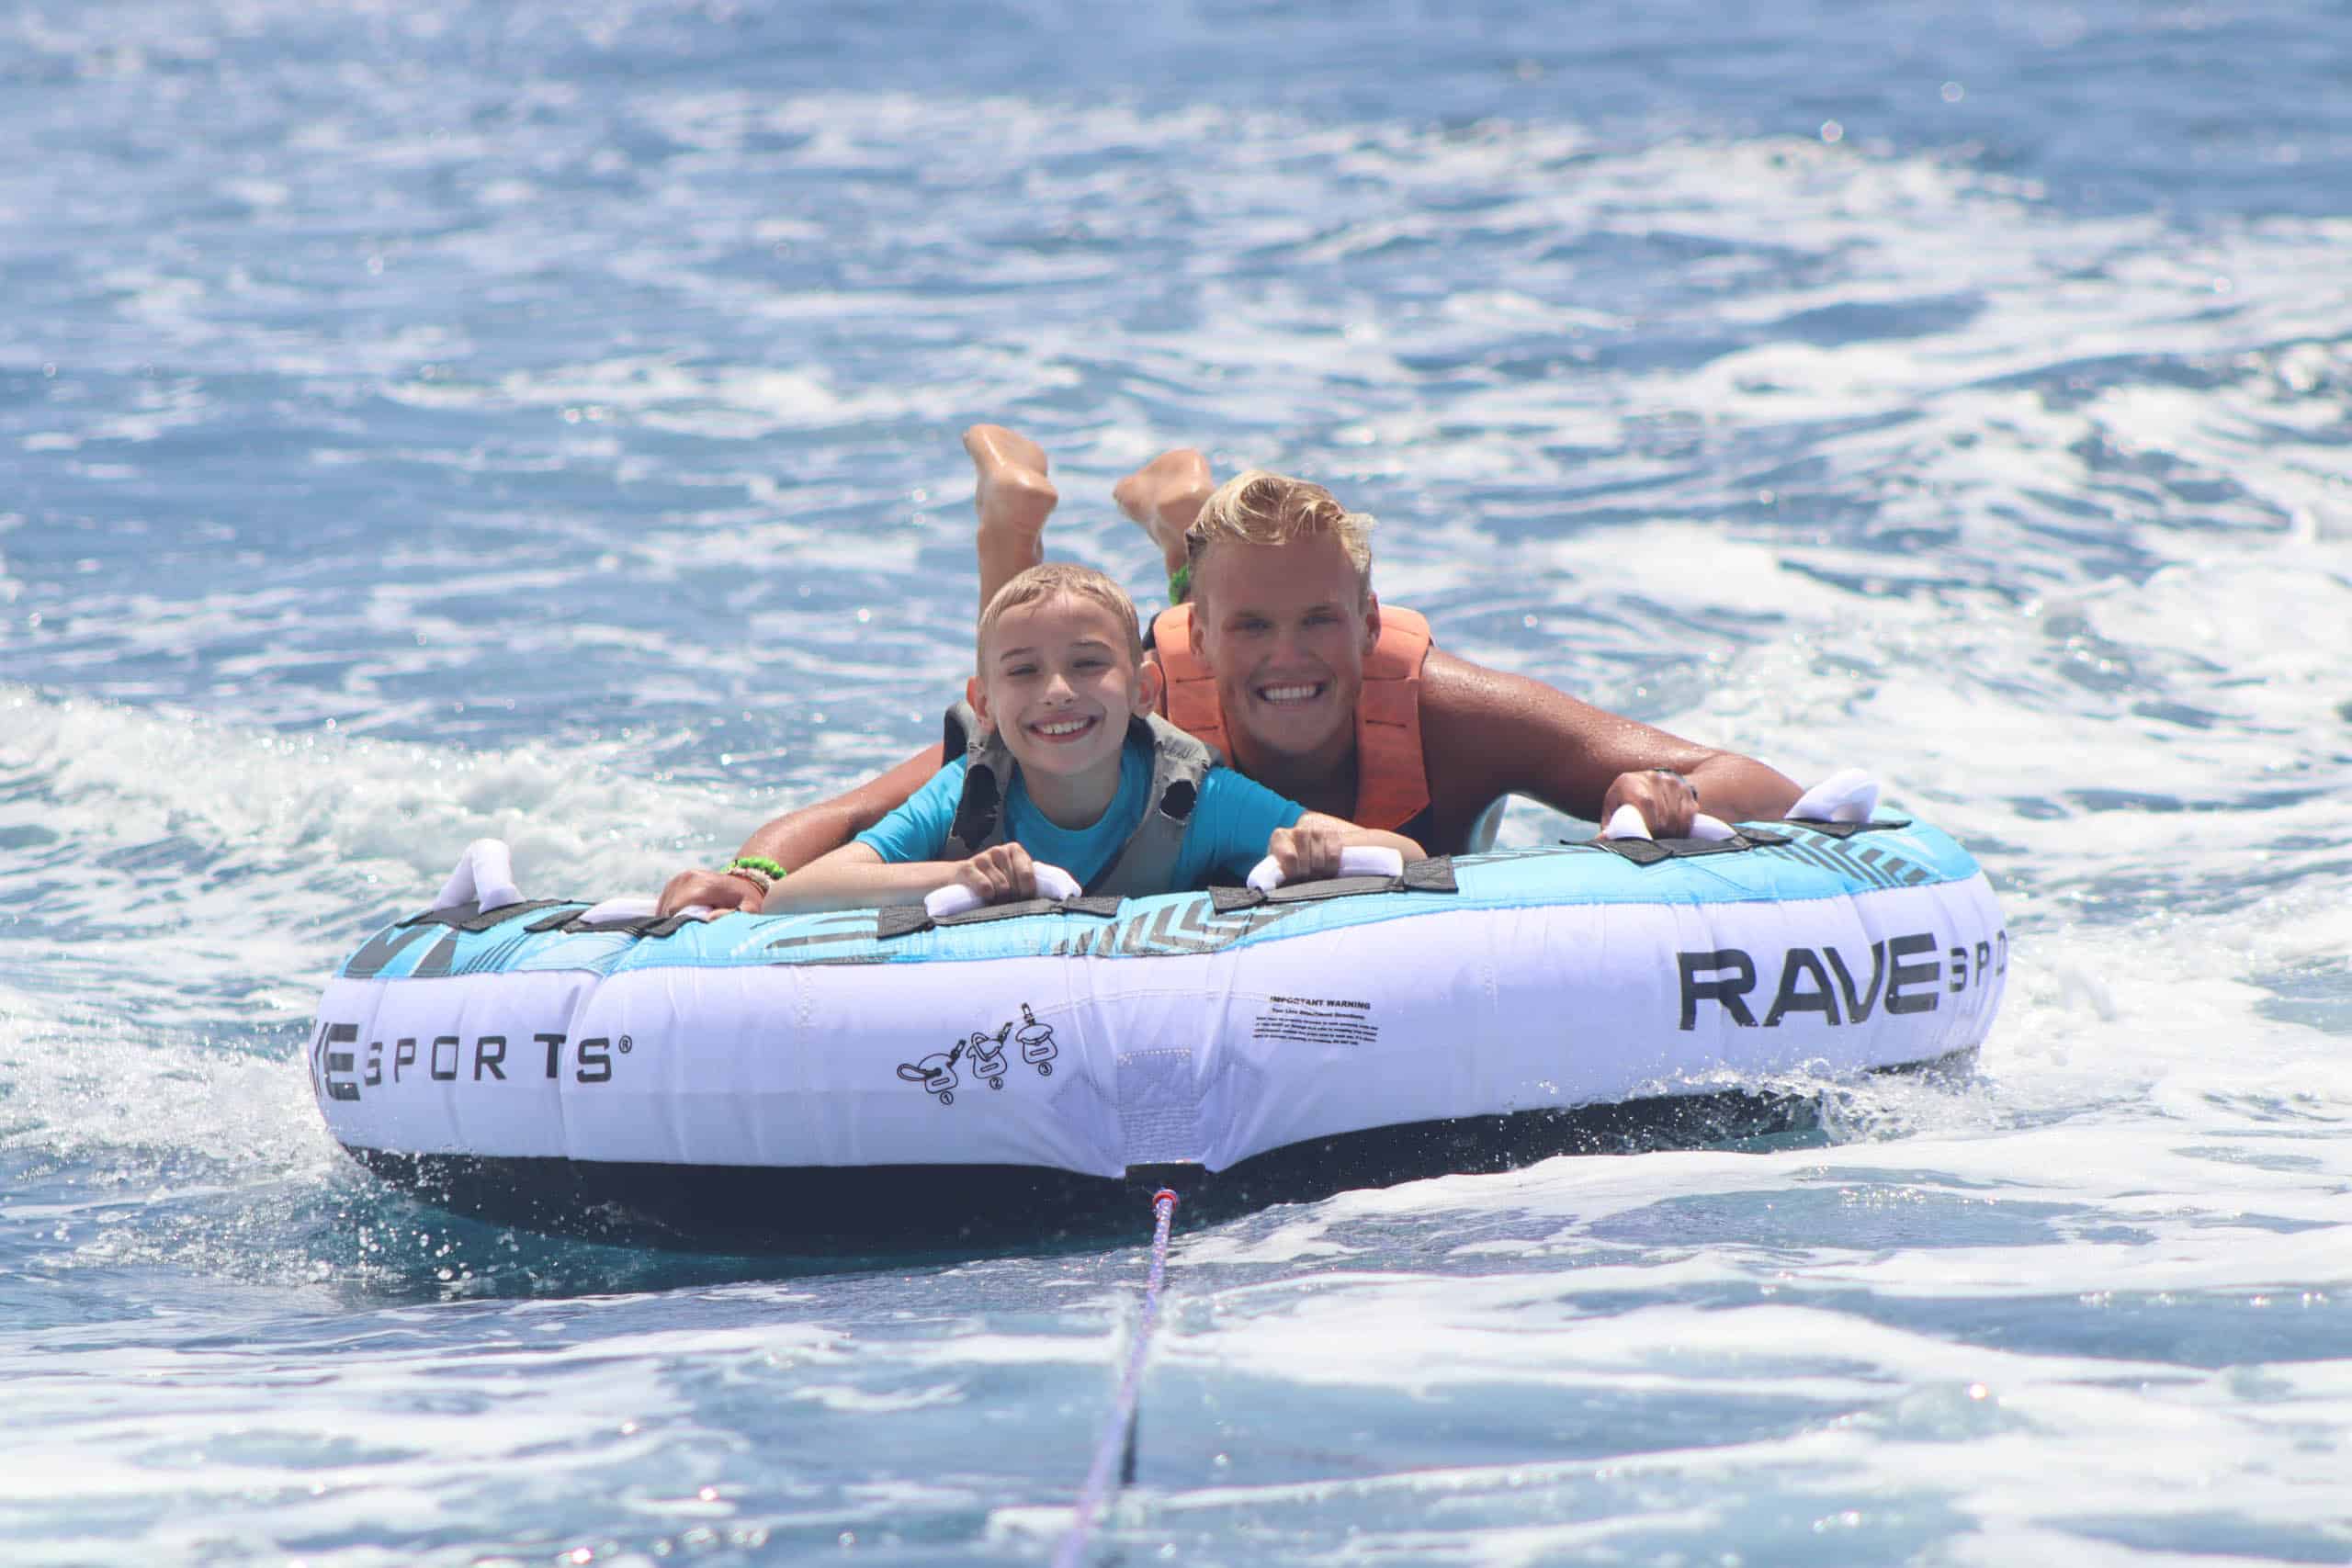 A CSC staff member and camper tubing.